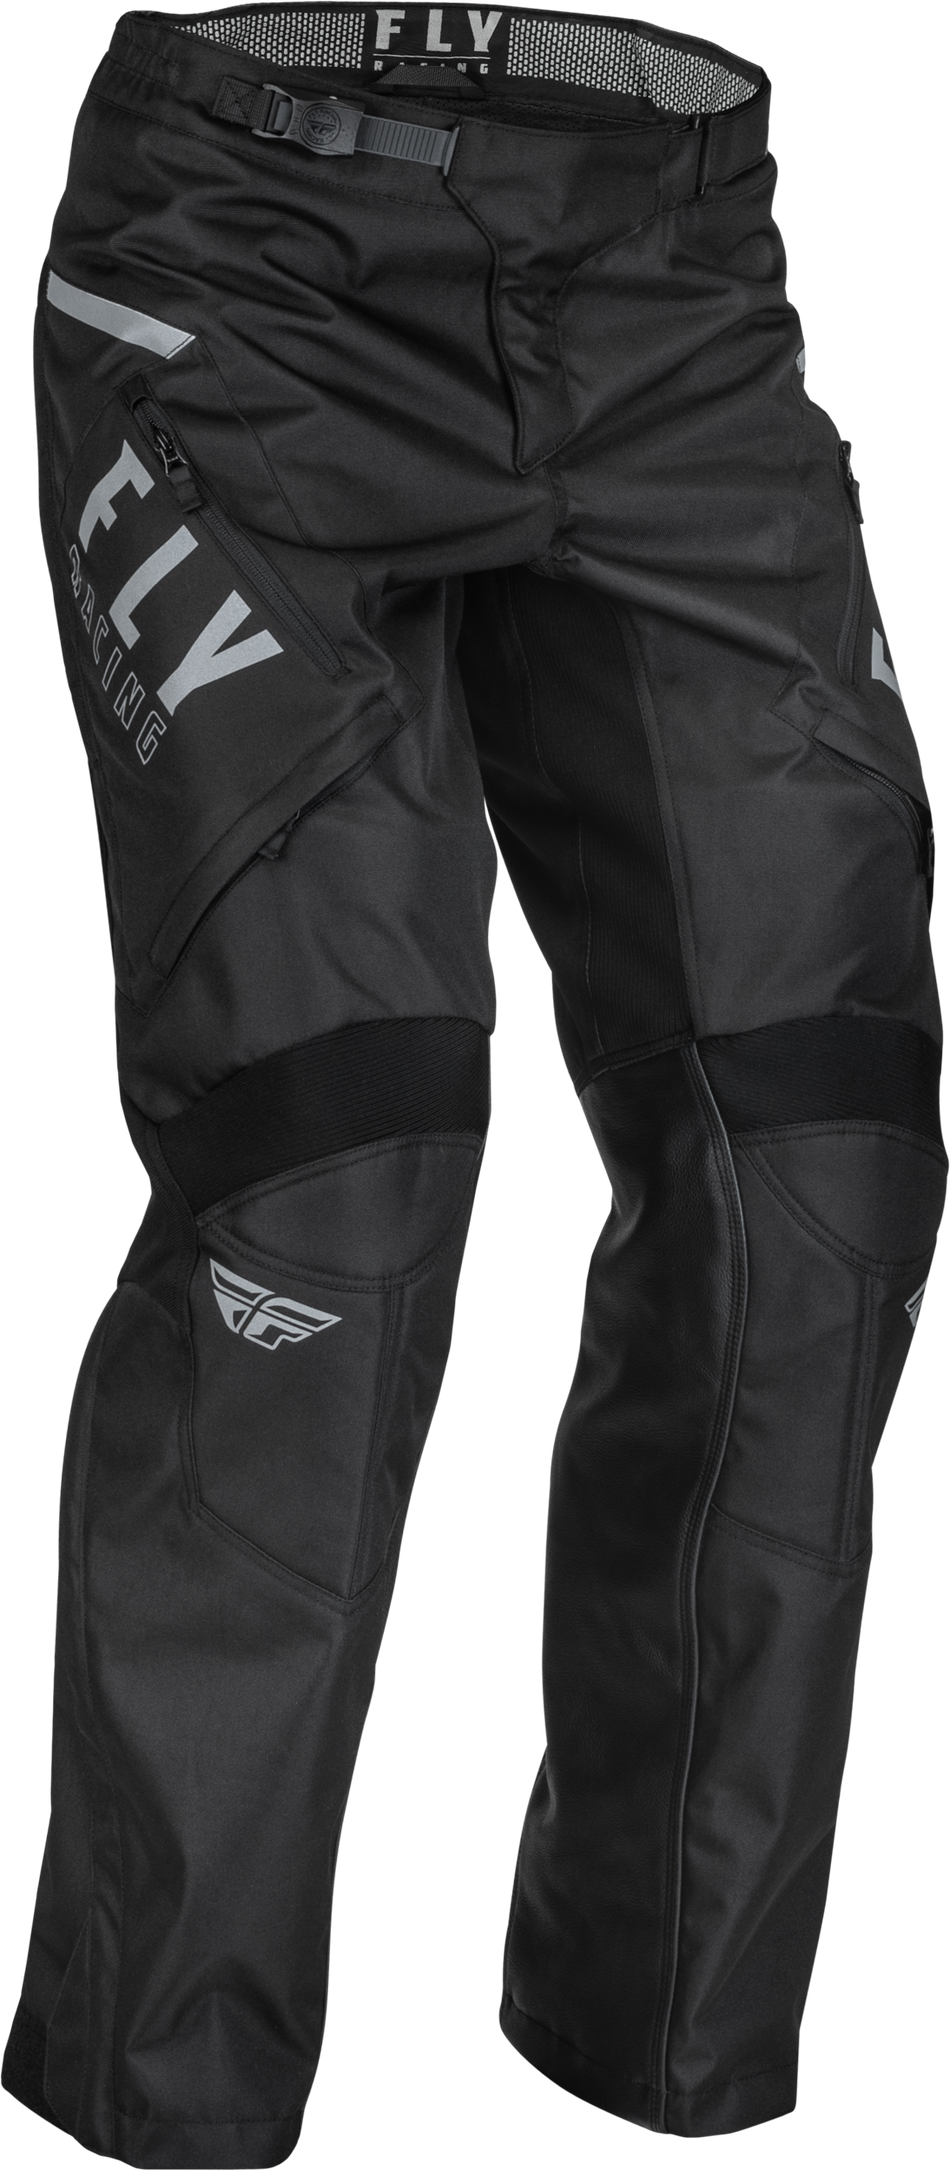 FLY RACING Patrol Over-Boot Pants Black/White Sz 42 376-64042